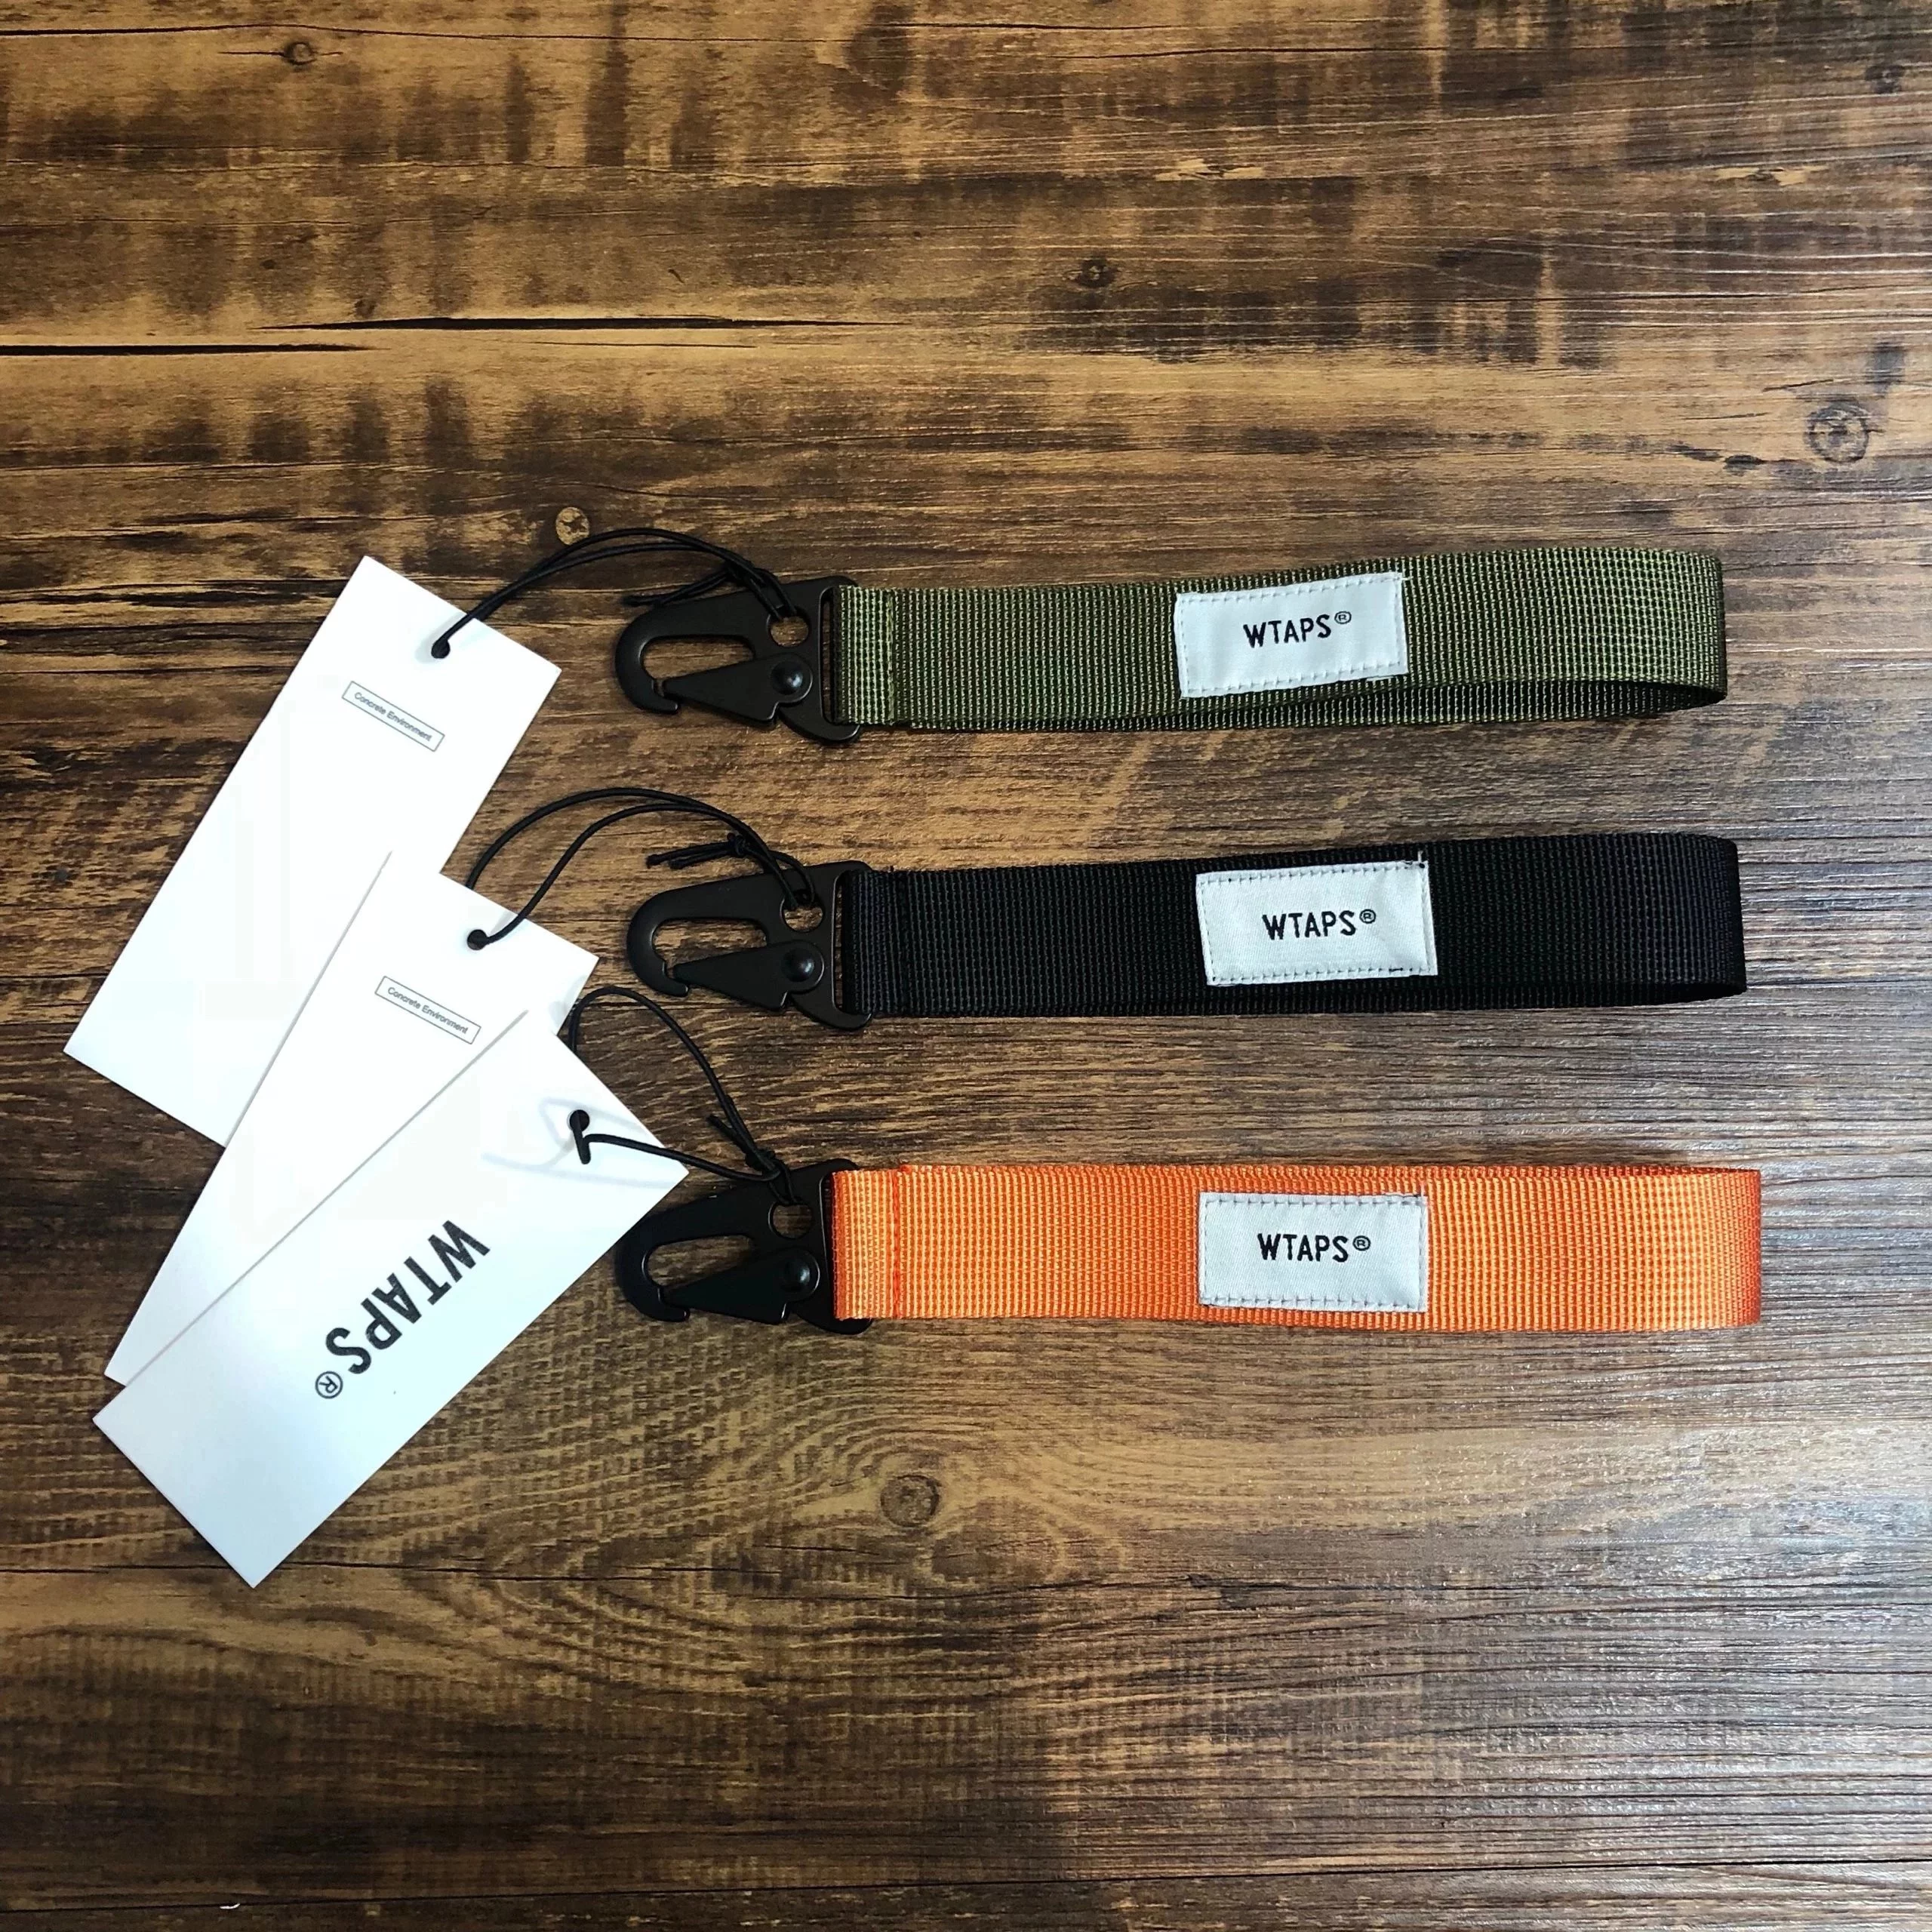 WTAPS HARNESS/KEY HOLDER.POLY 钥匙扣19AW